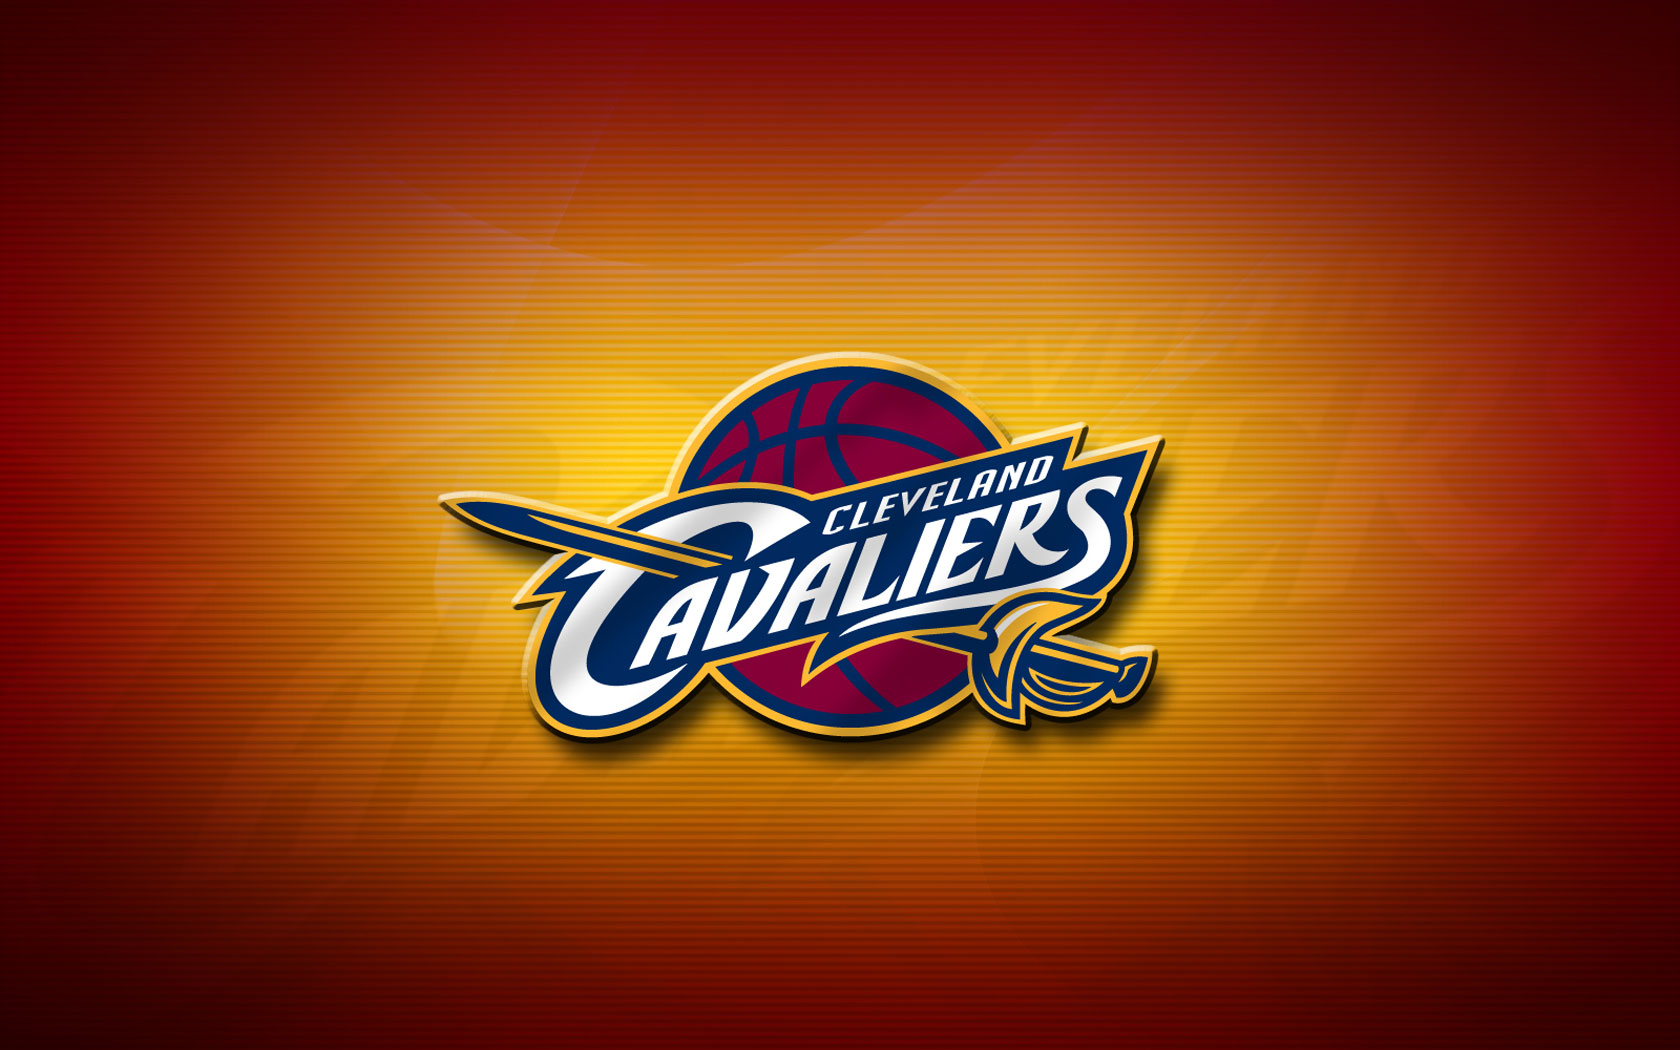 Cleveland Cavaliers Is Sending Push Notifications With Ibeacon